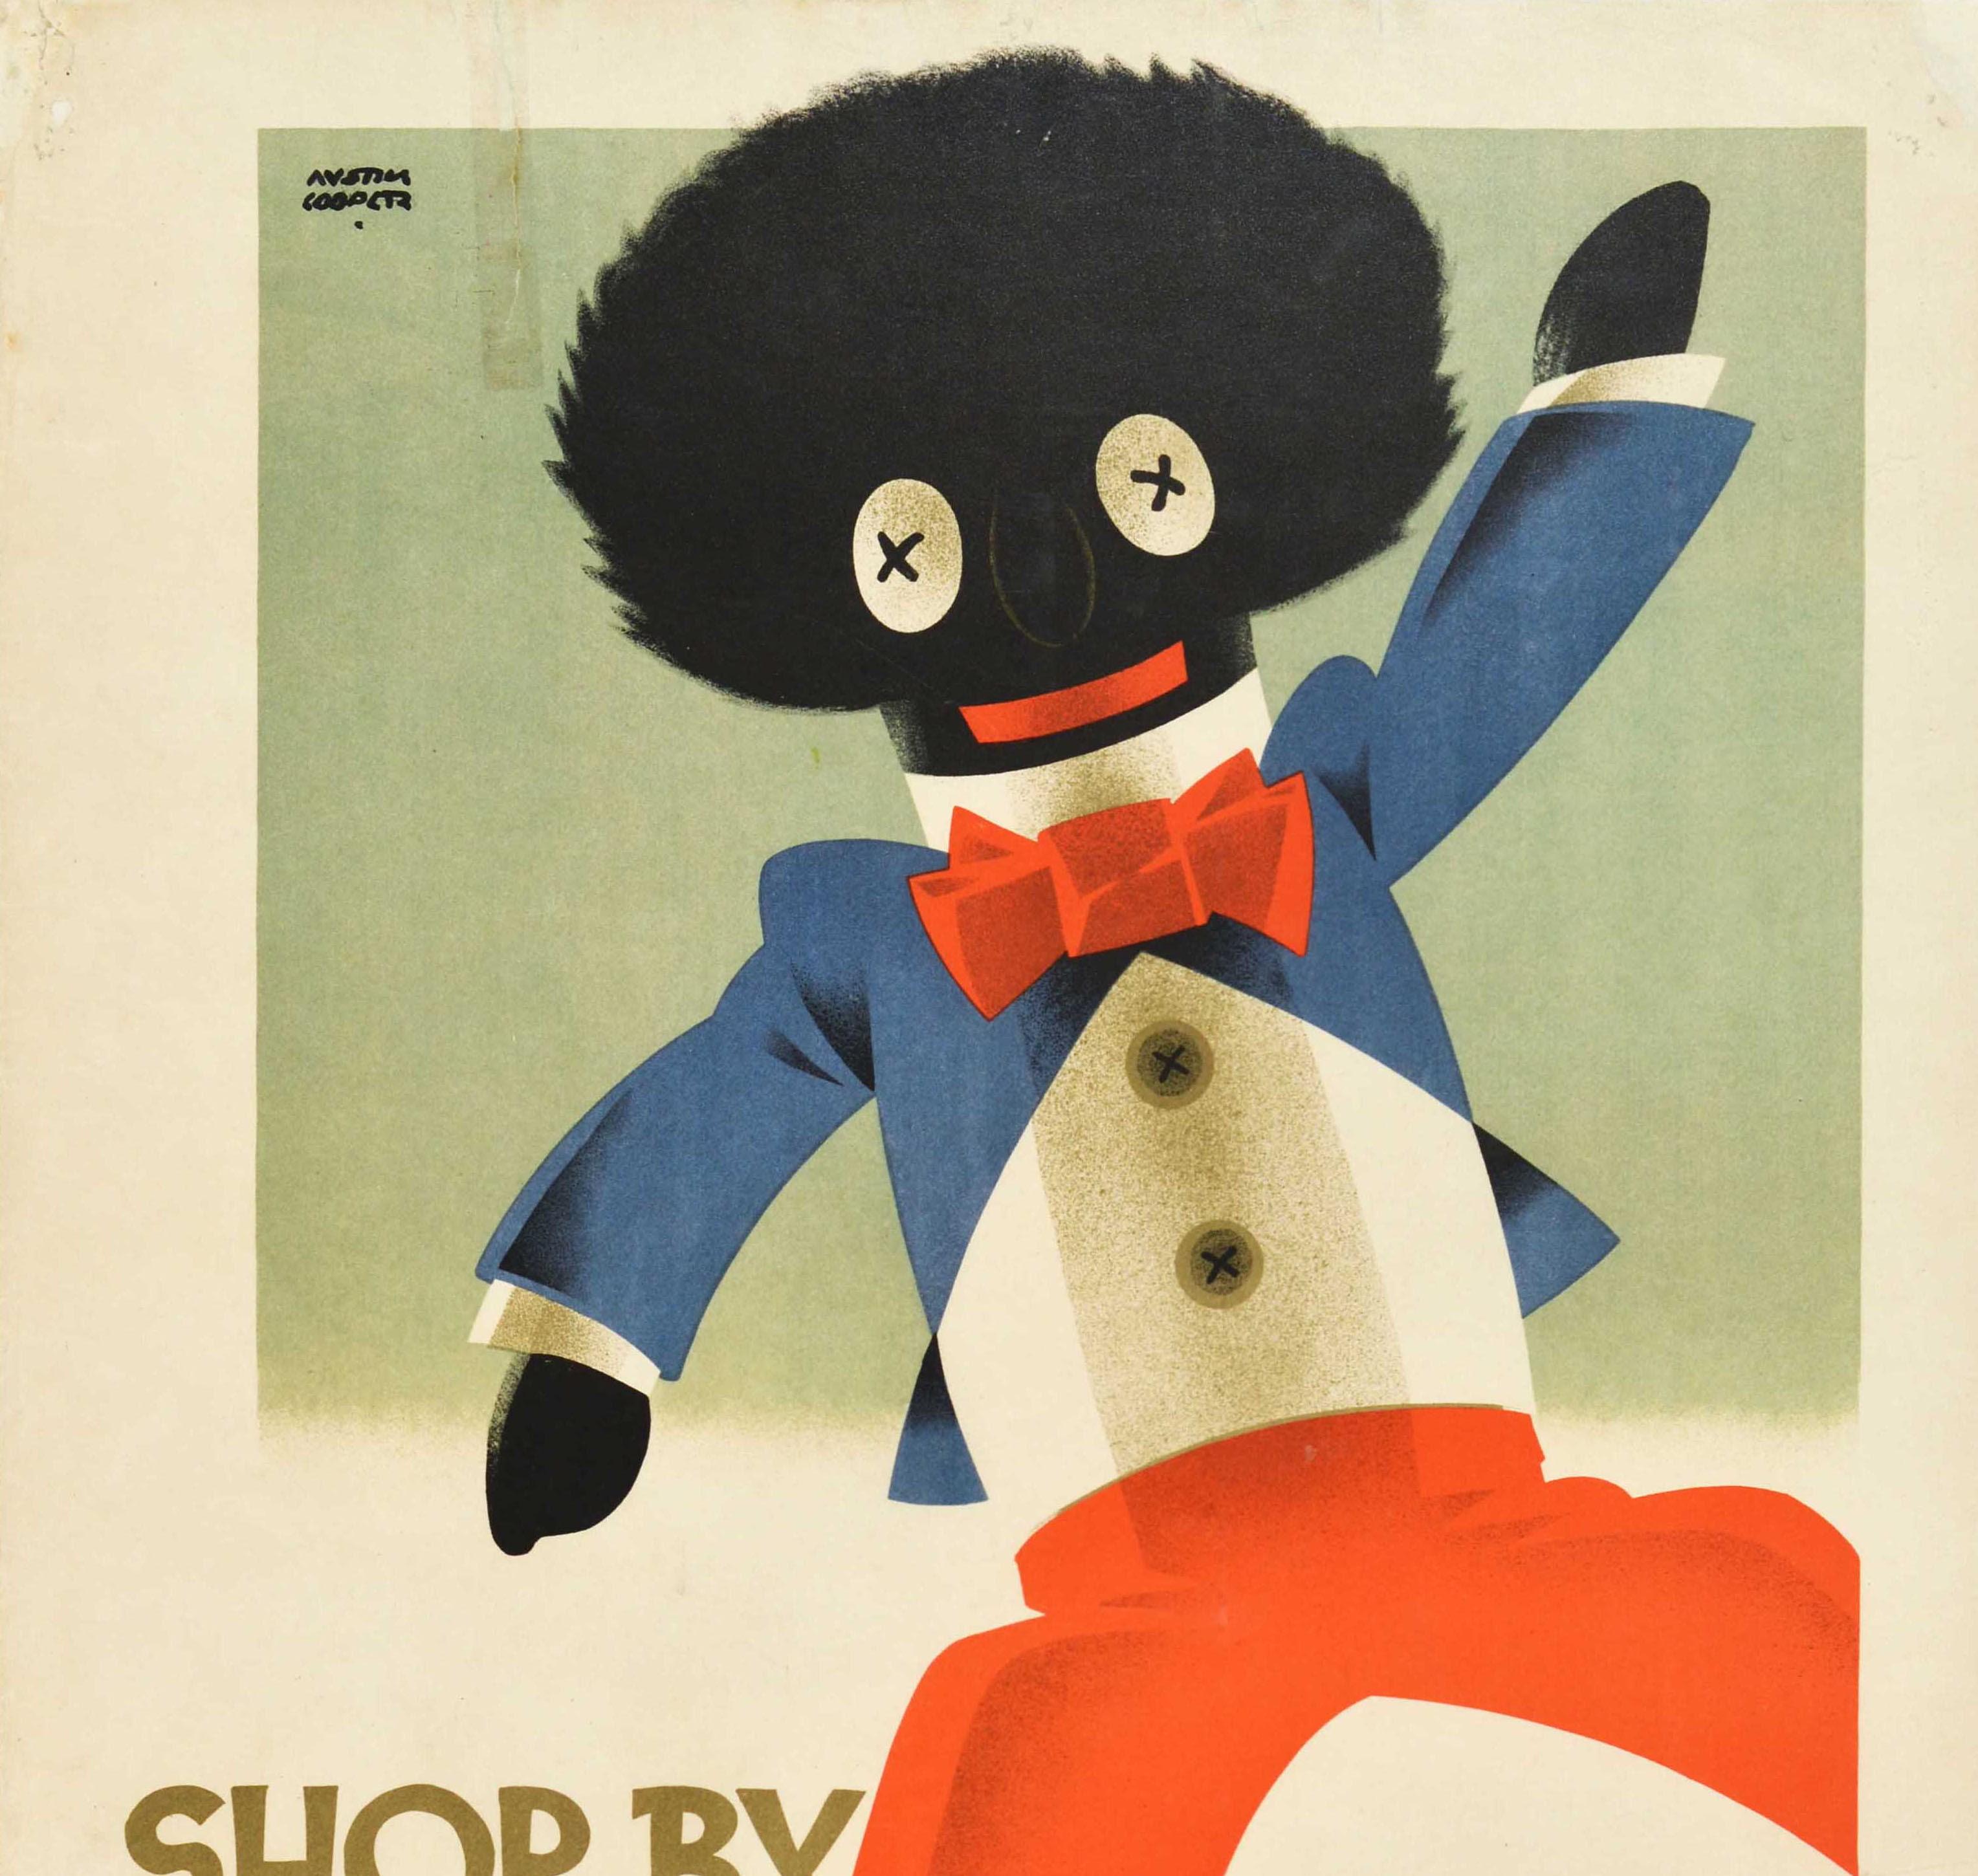 Original vintage London Underground poster by the notable illustrator and commercial artist Austin Cooper (1890-1964) to promote off peak travel on the Tube featuring a colourful image of a smiling golly doll with the Underground logo and text in